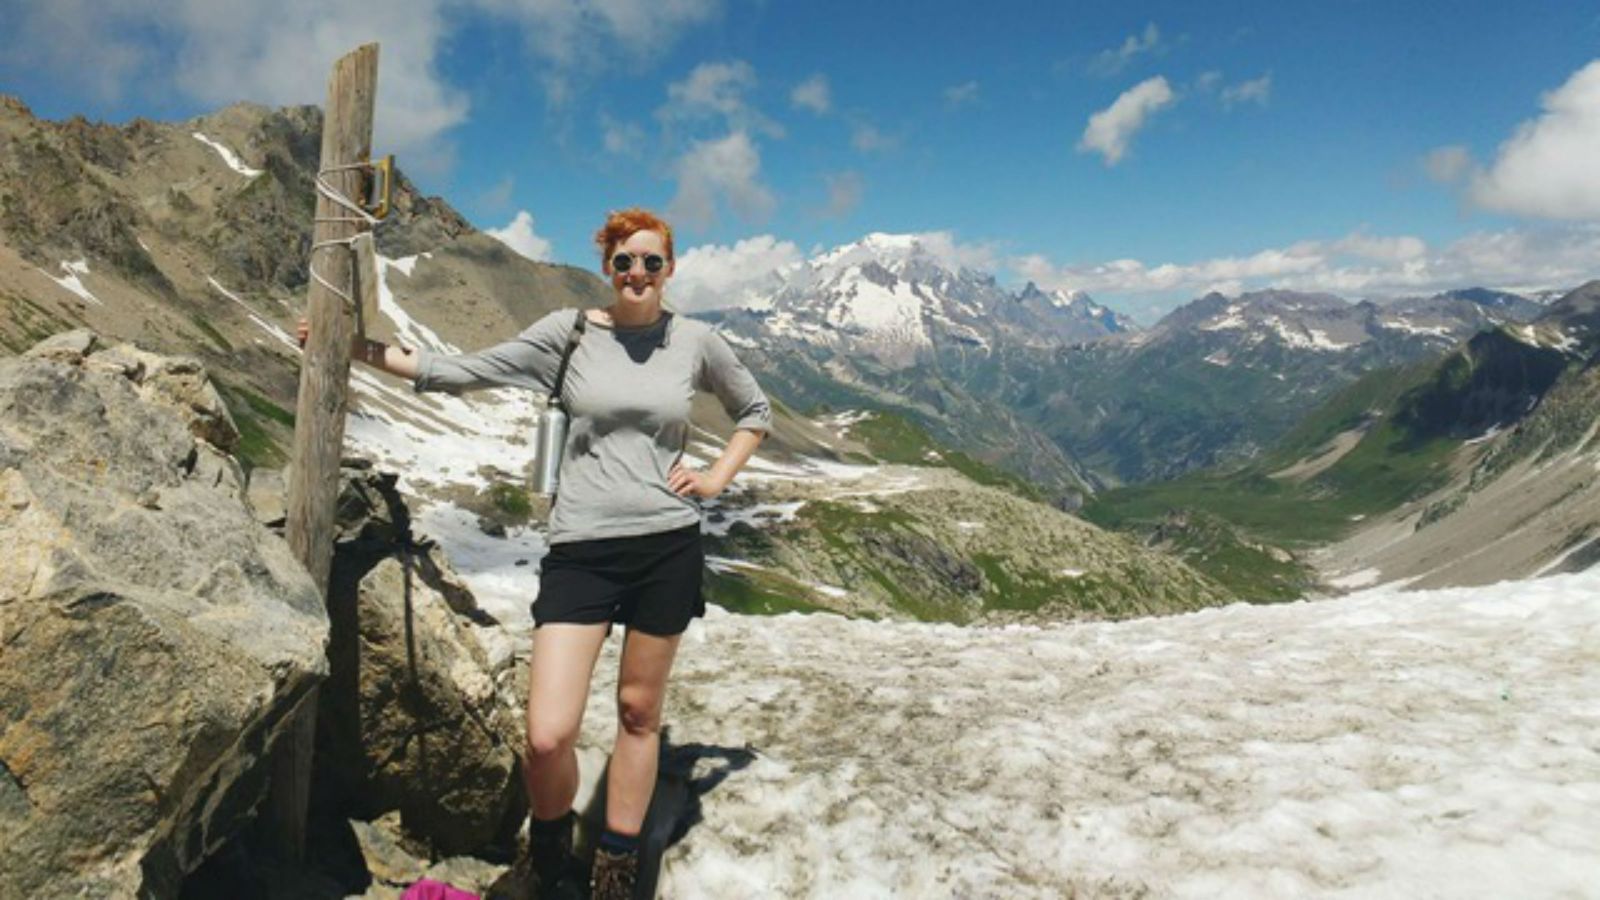 PhD candidate, Florence Isaacs stands next to a wooden box in the French Alps, with mountain scenery behind her.